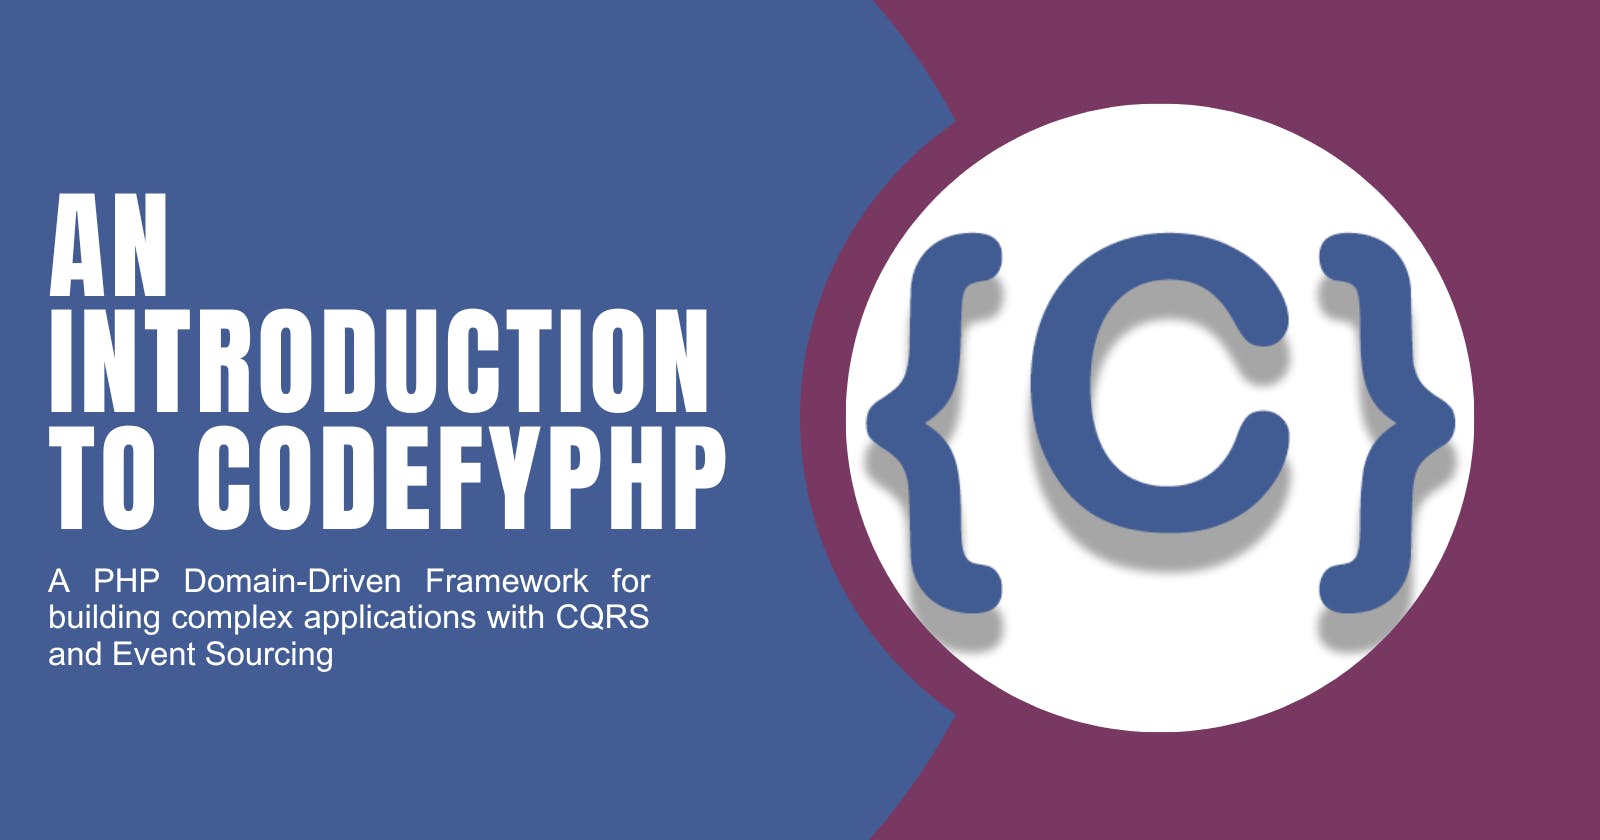 An Introduction to CodefyPHP: A Domain-Driven Framework